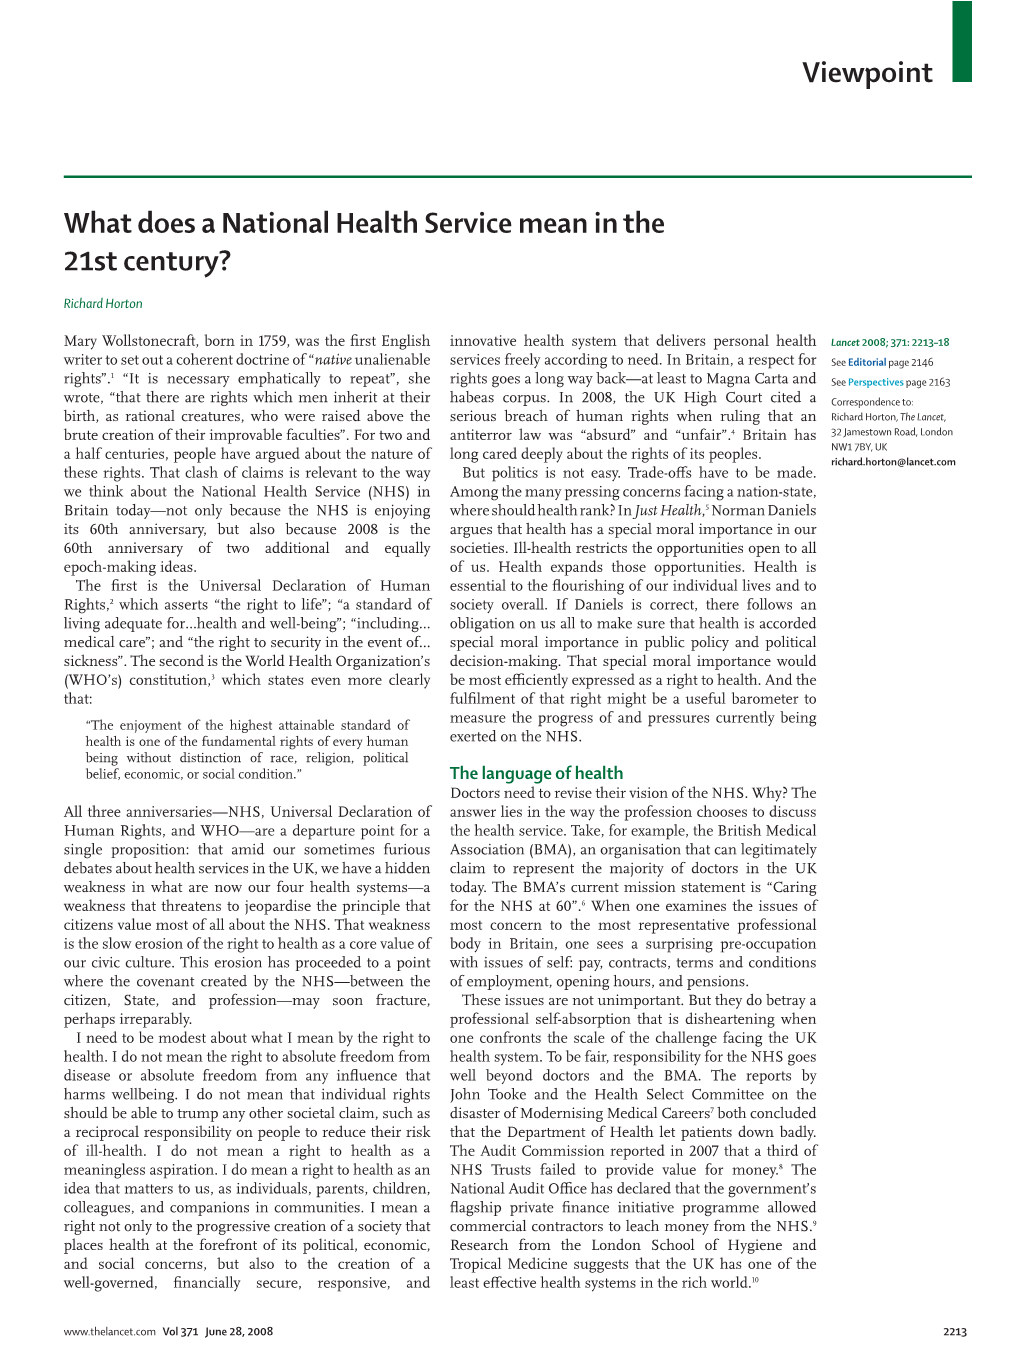 Viewpoint What Does a National Health Service Mean in the 21St